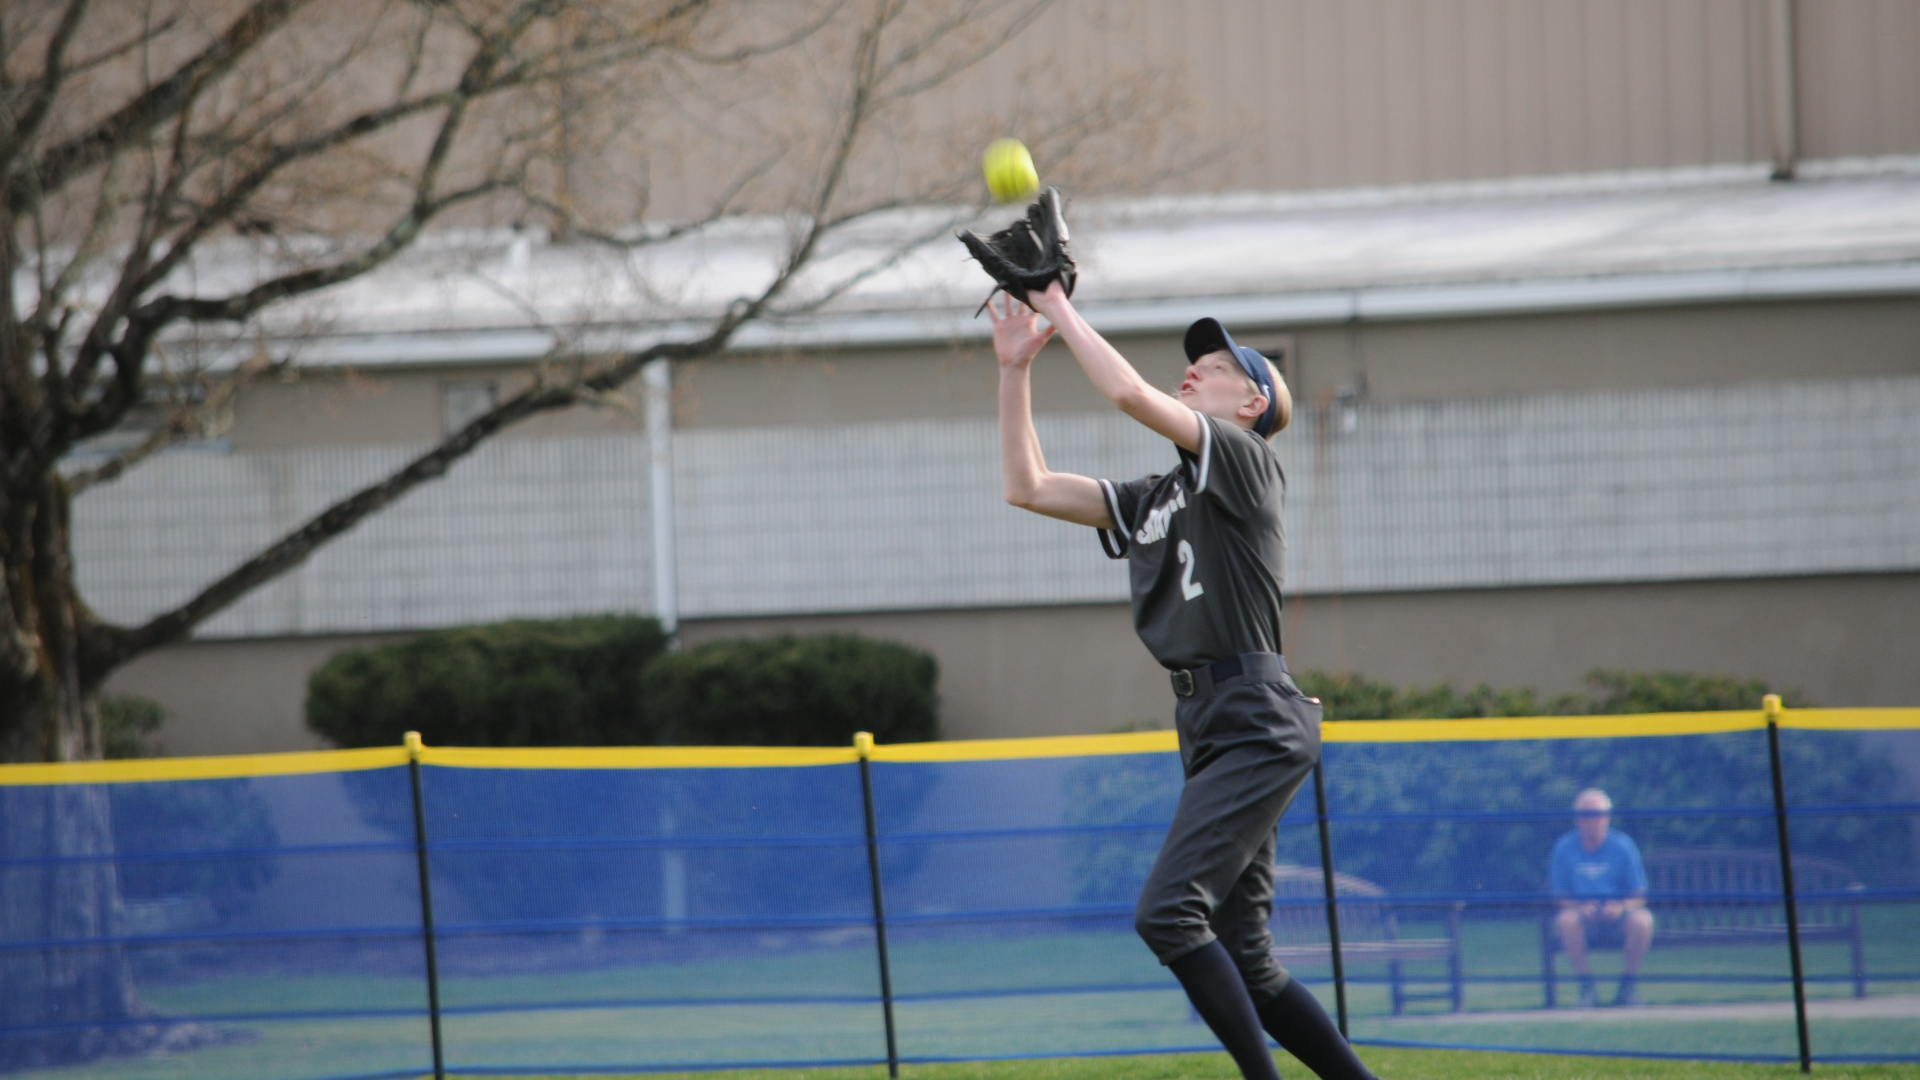 Megan Gatto had 2 hits, 2 stolen bases and an RBI on the road Friday at Penn State New Kensington.